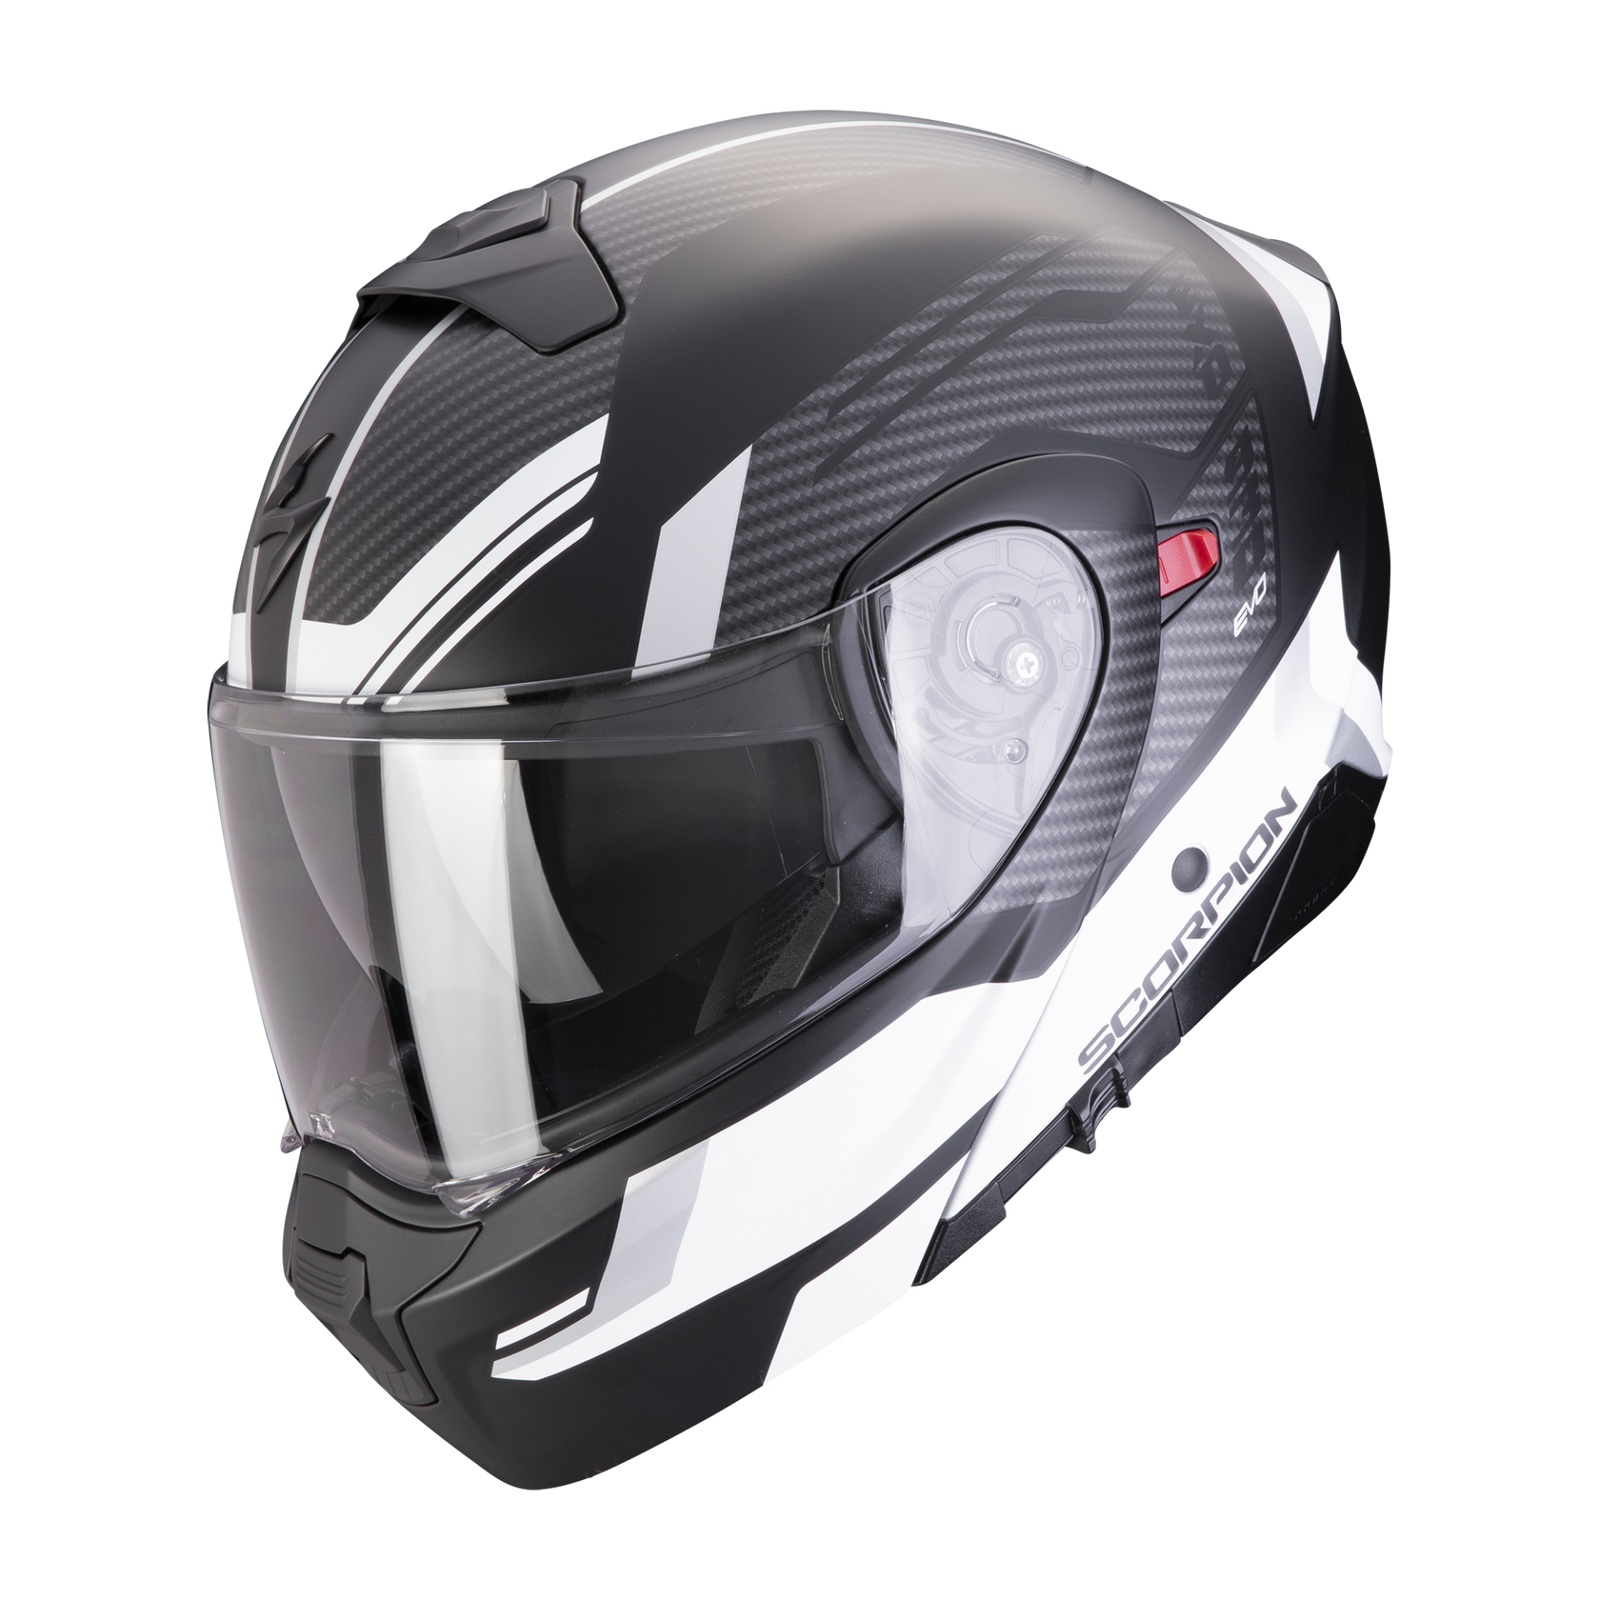 Scorpion Introduces the Affordable Exo-930 Evo Modular Helmet: Safety and Comfort on a Budget